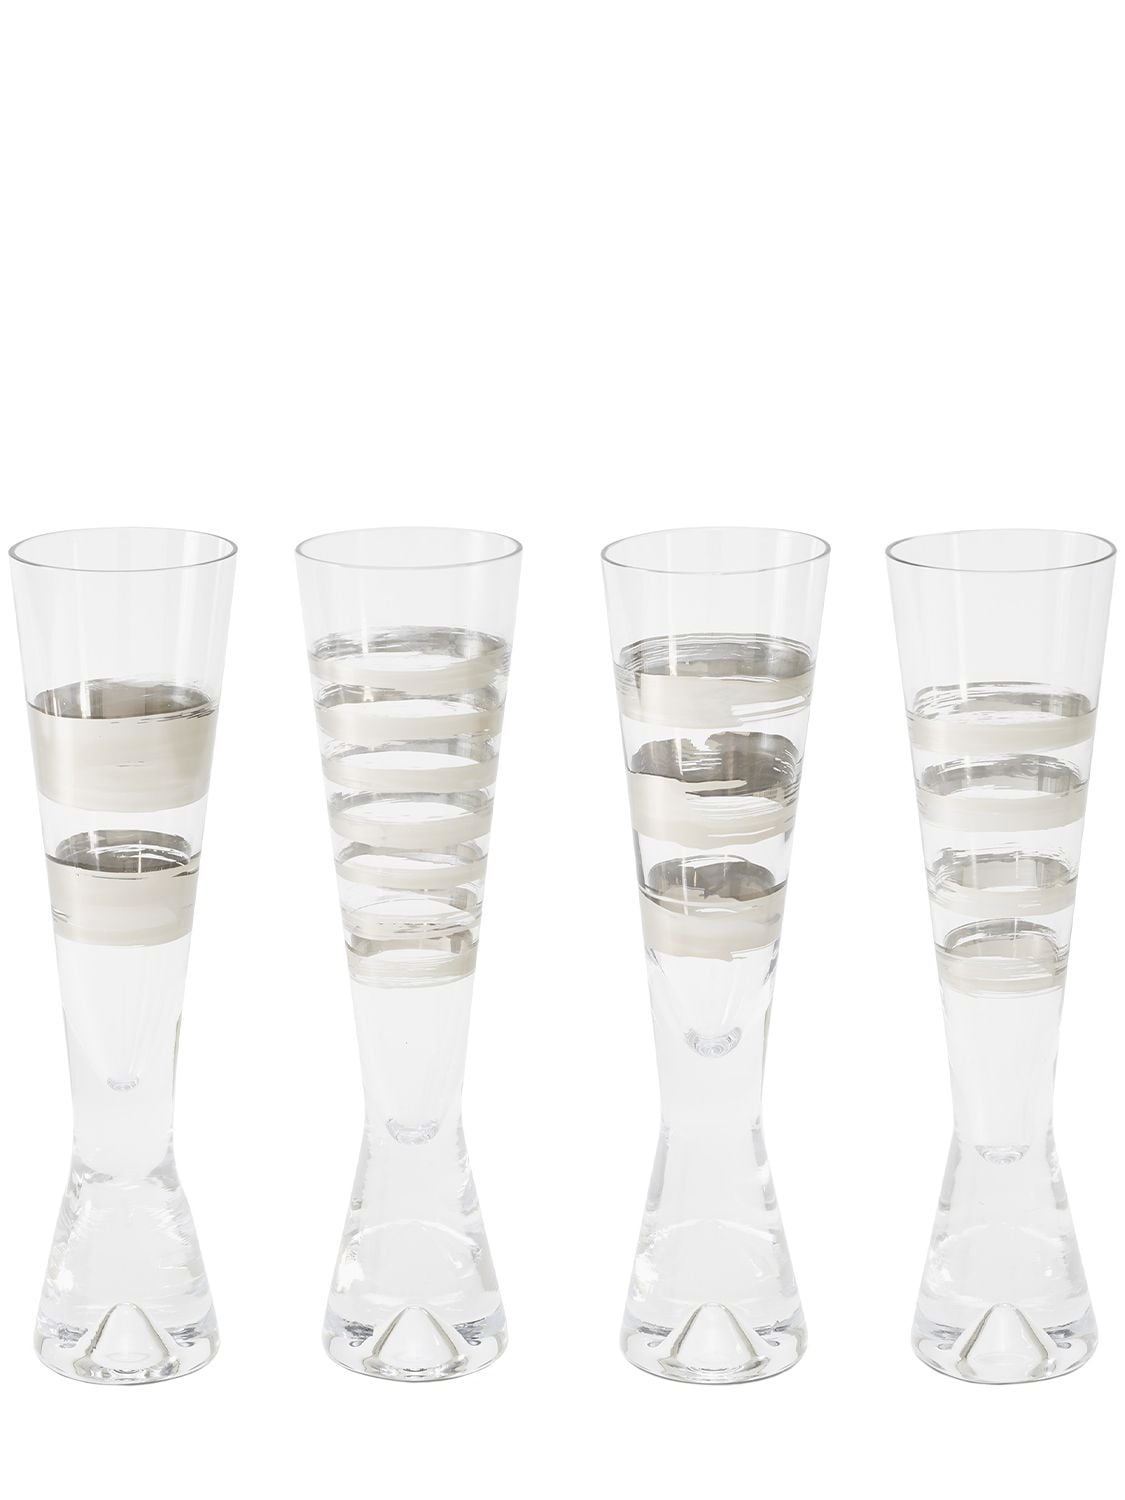 Tom Dixon Thank Champagne Glasses Set Of 4 In Transparent